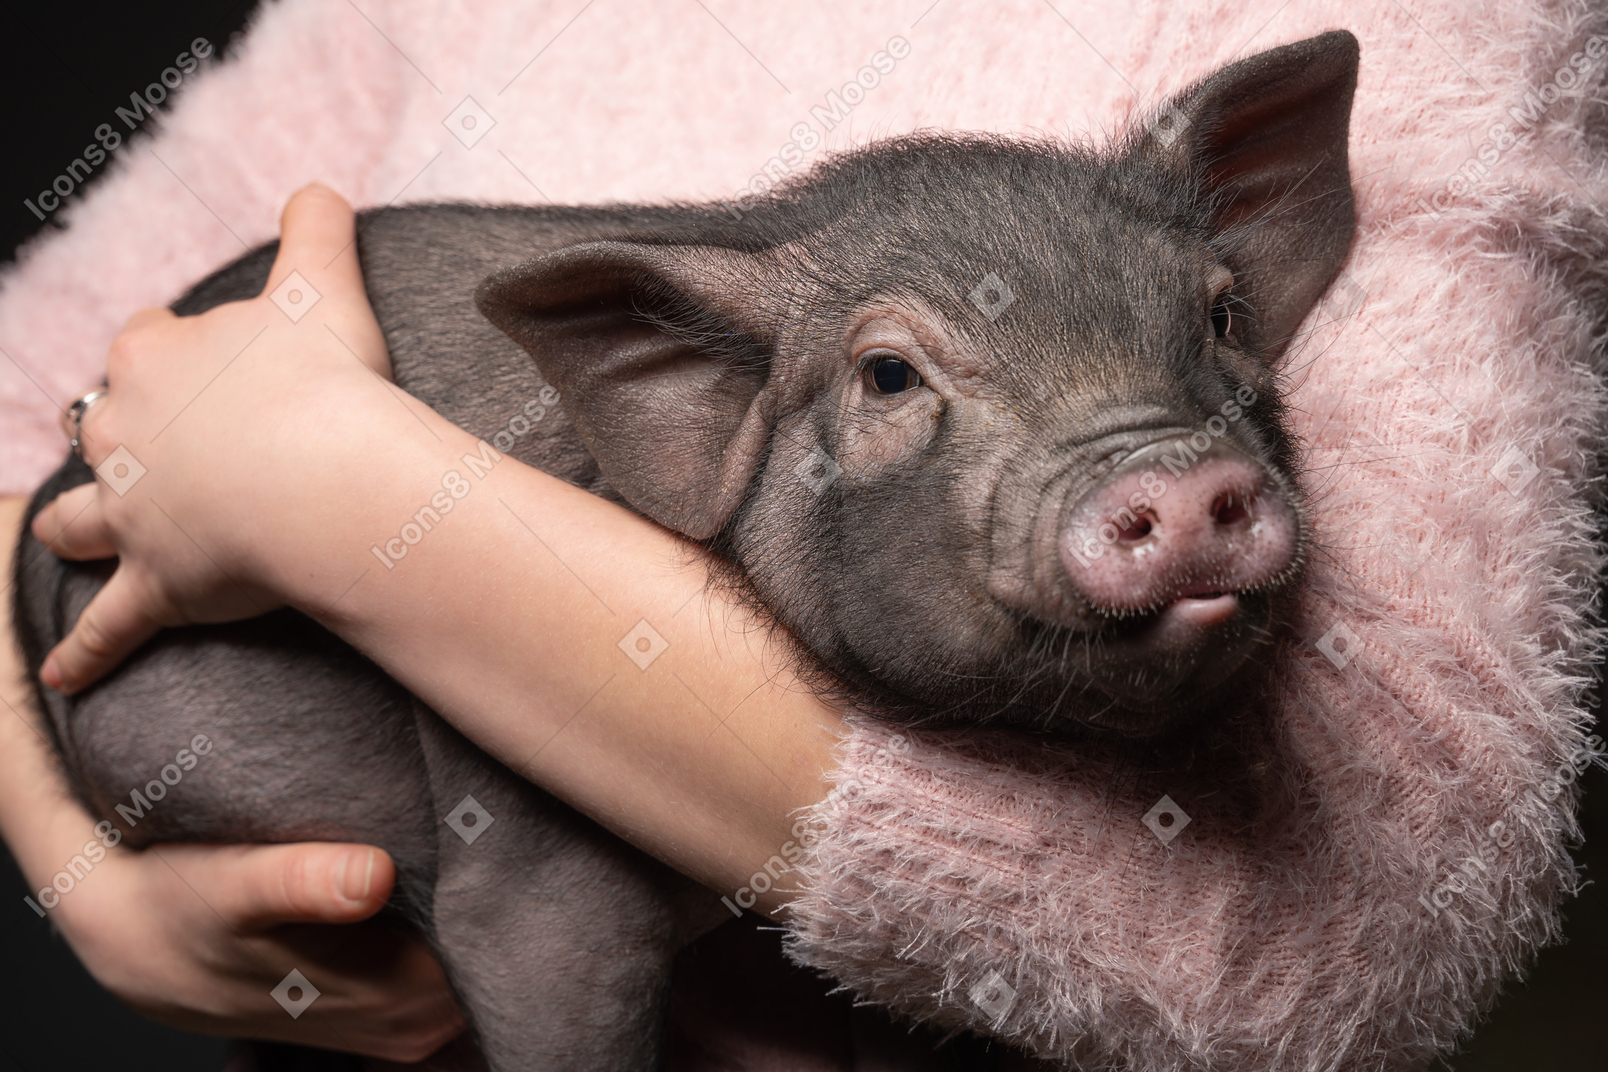 Young woman holding a miniature pig